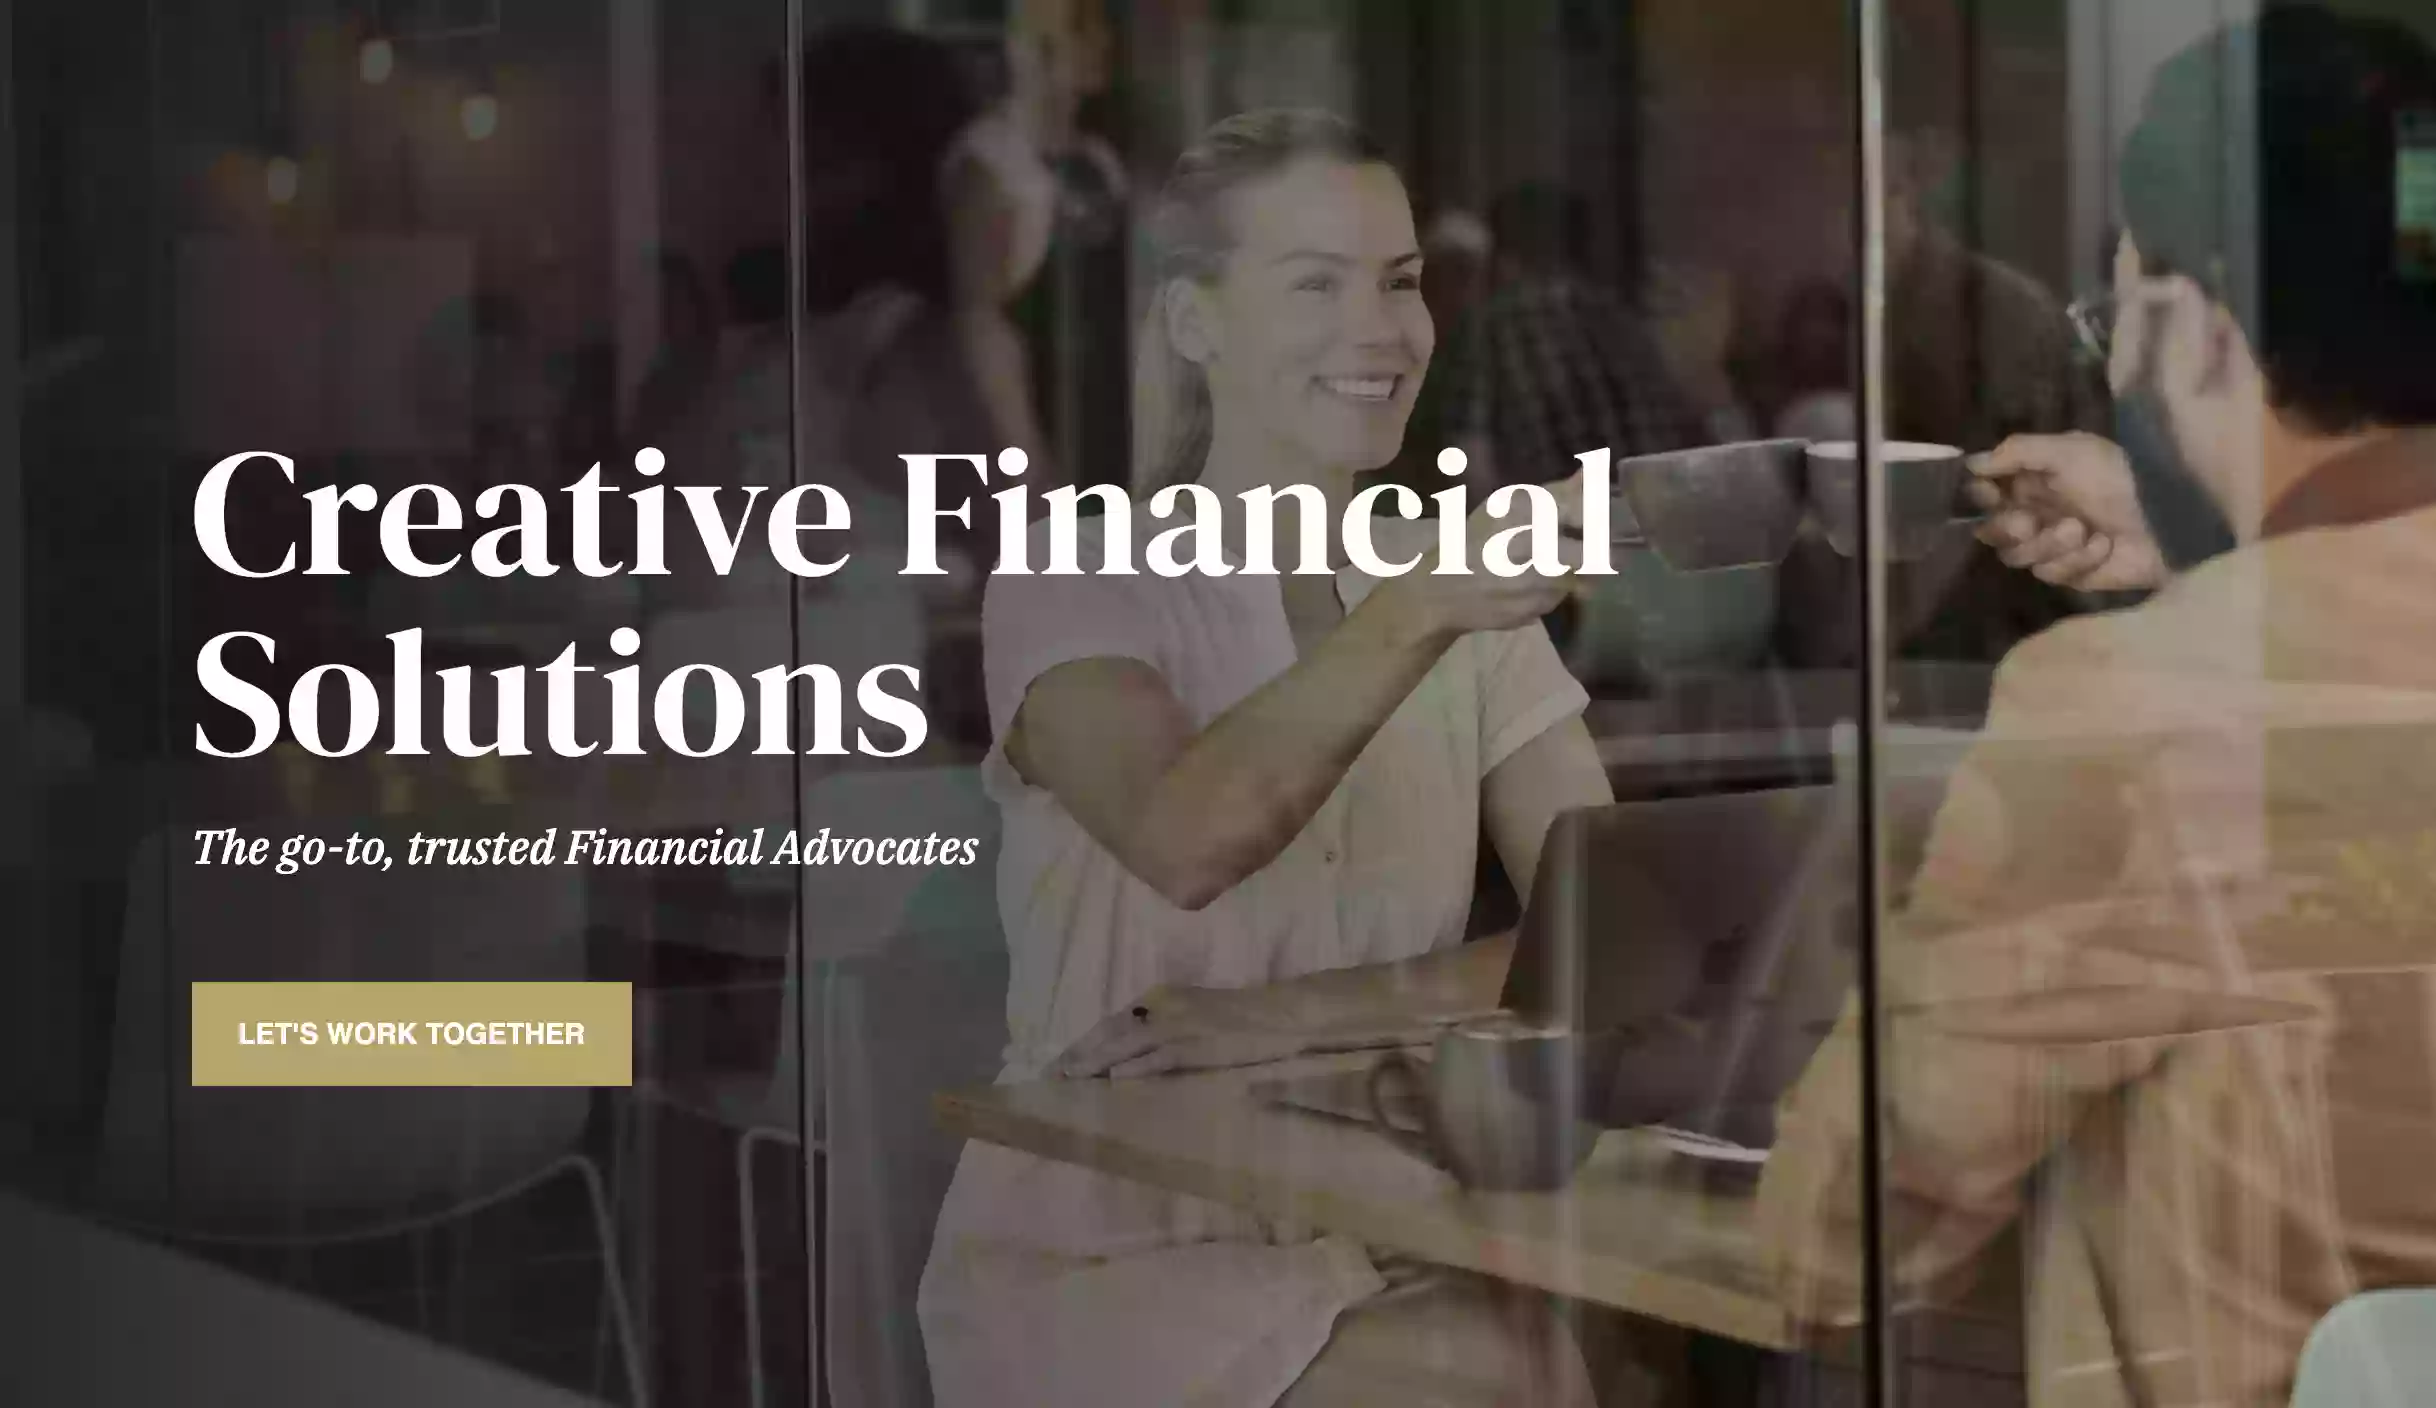 NW Premier - Creative Financial Solutions